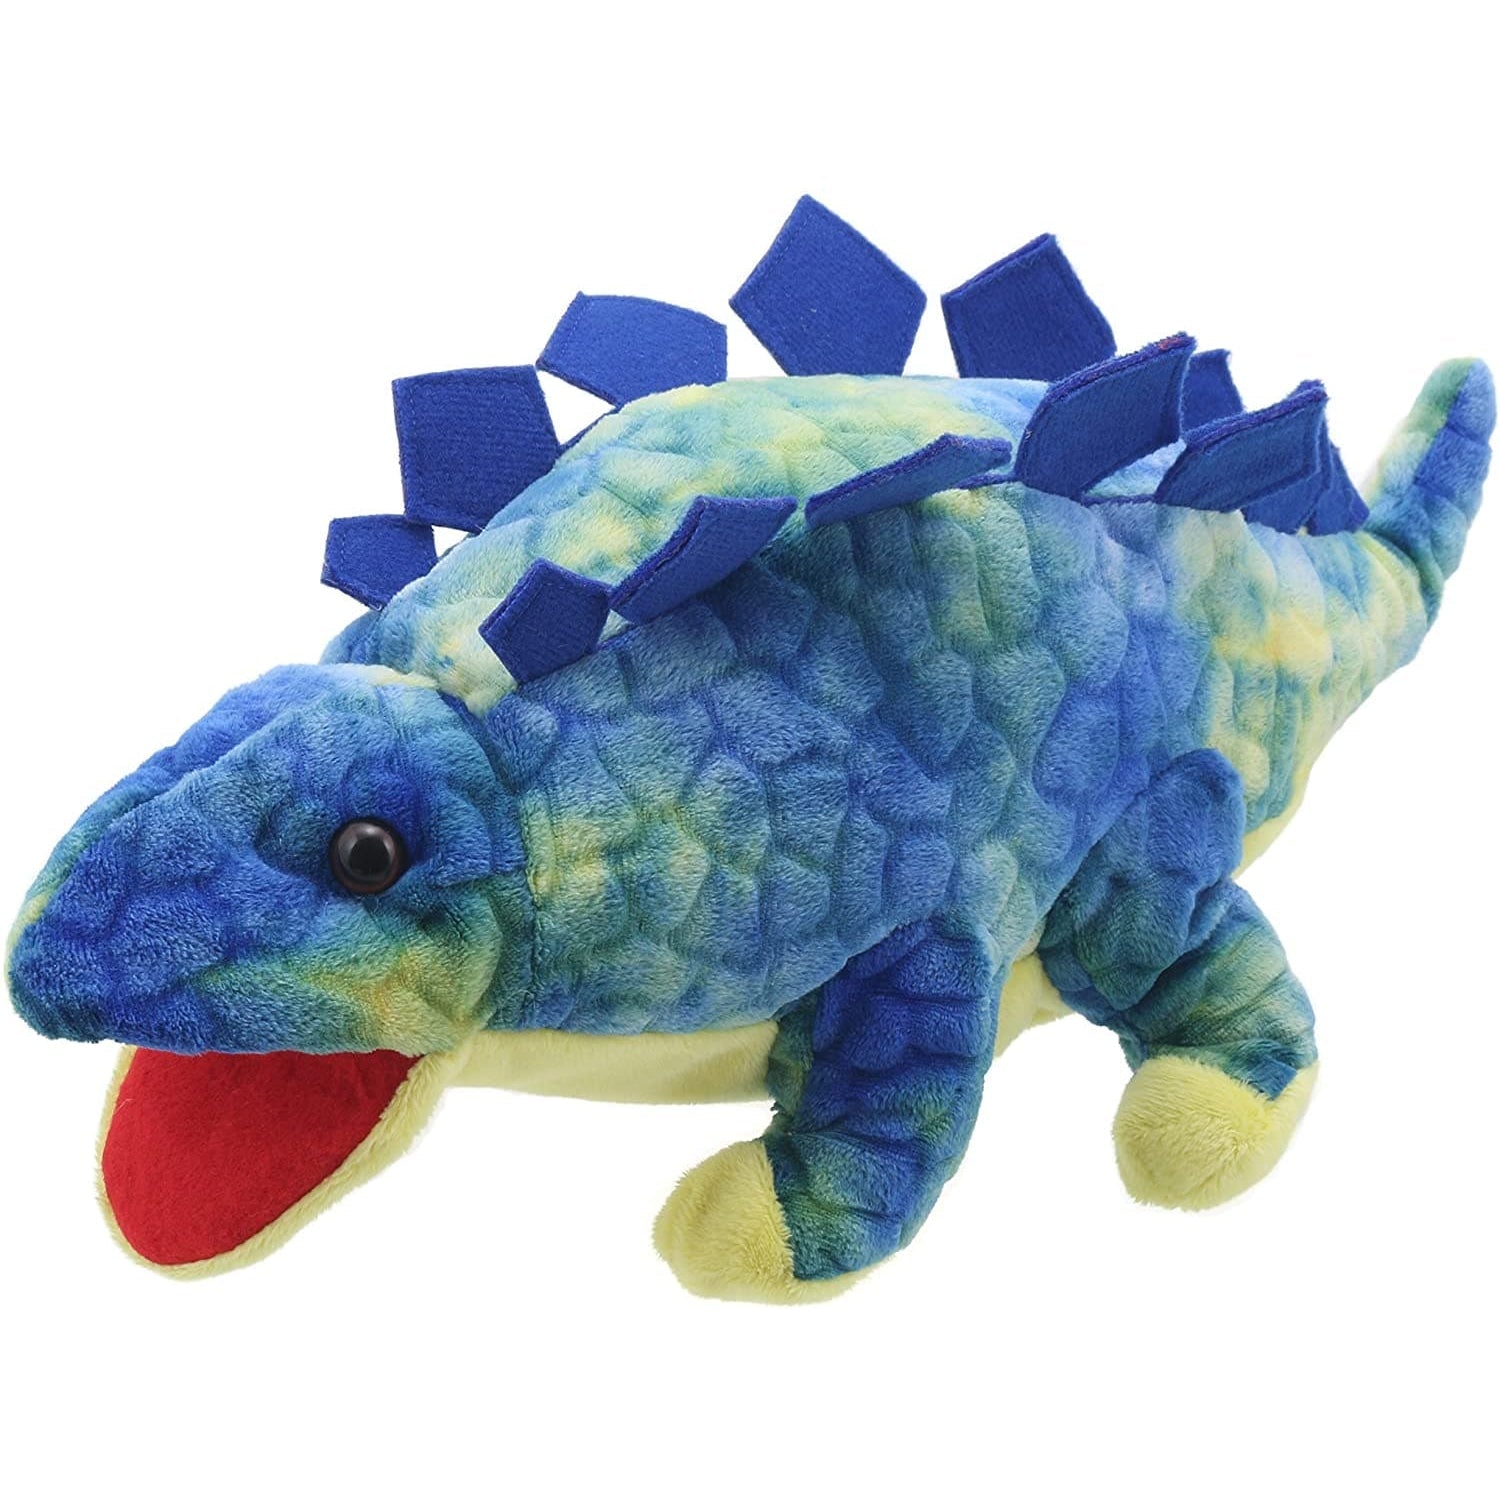 The Puppet Company-Baby Stegosaurus Puppet - Blue-PC002904-Legacy Toys